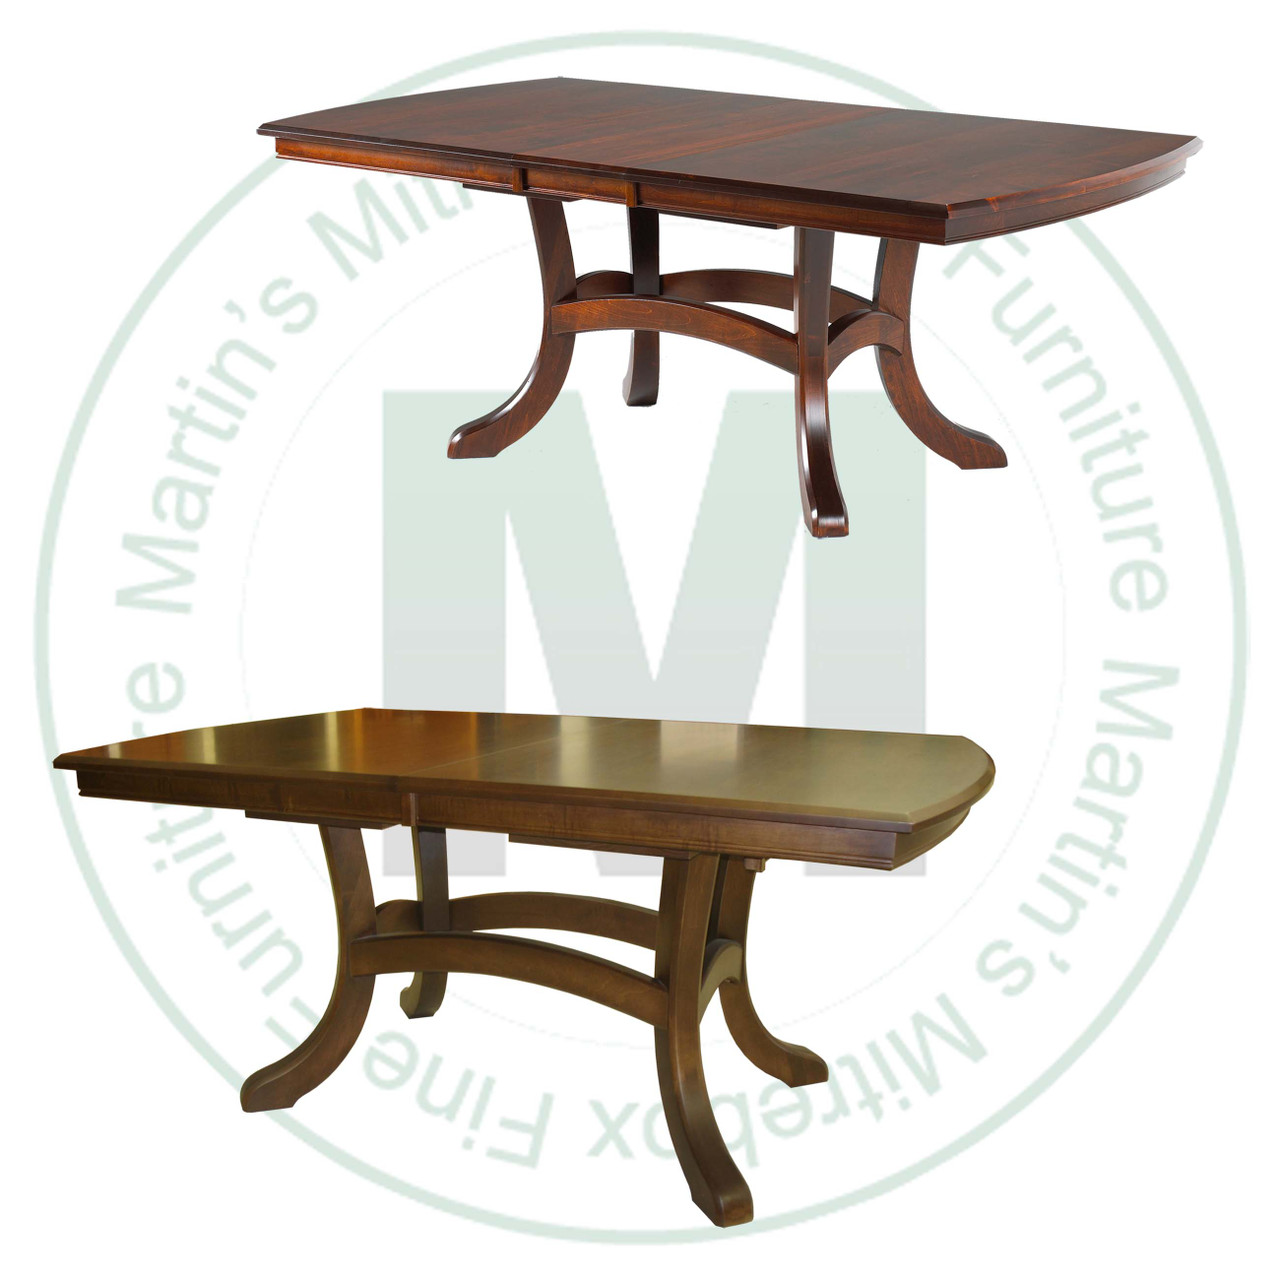 Maple Jordan Double Pedestal Table 54''D x 72''W x 30''H With 3 - 12'' Leaves. Table Has 1.25'' Thick Top